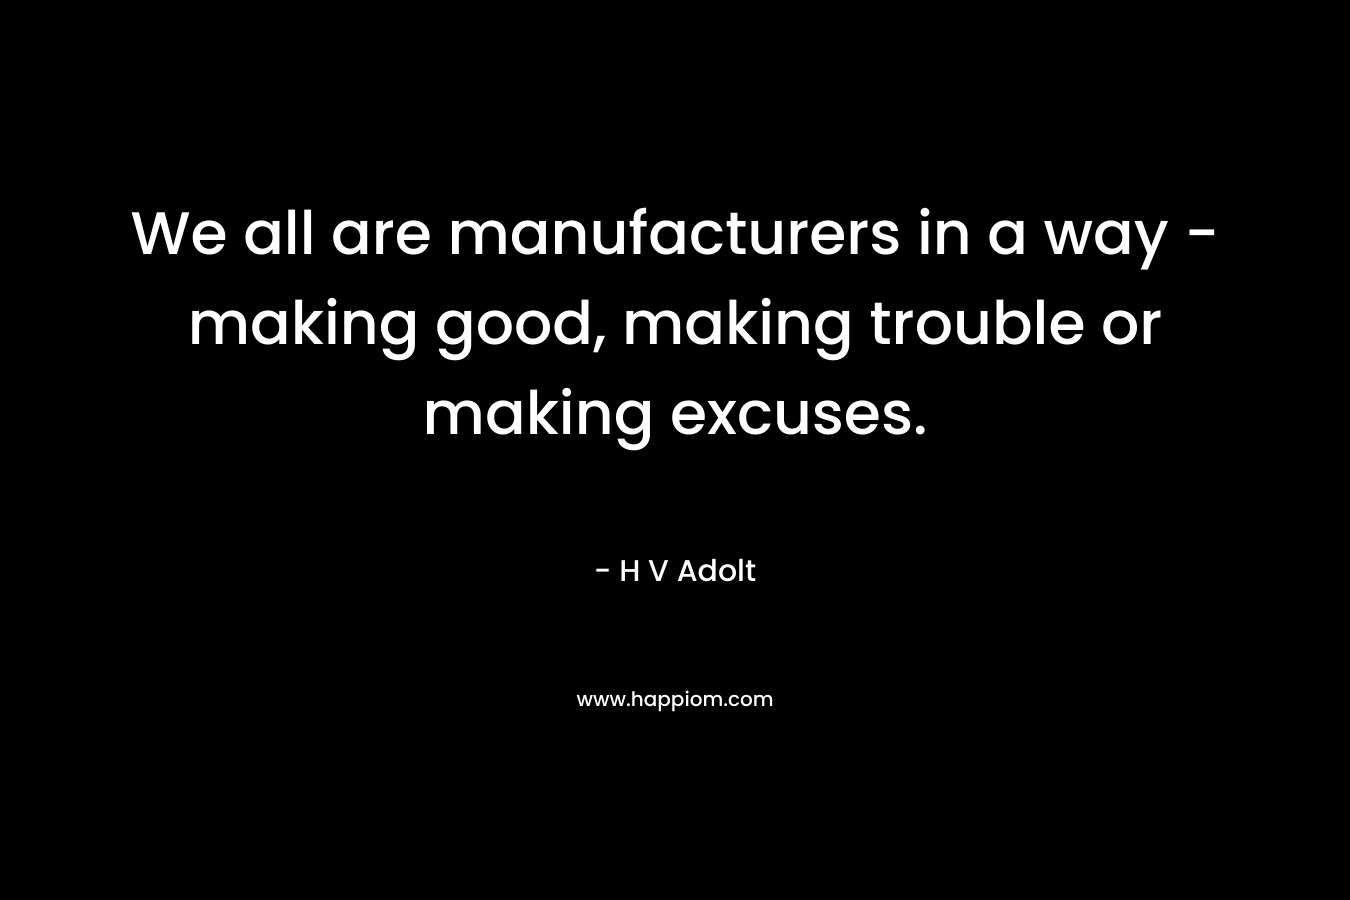 We all are manufacturers in a way - making good, making trouble or making excuses.